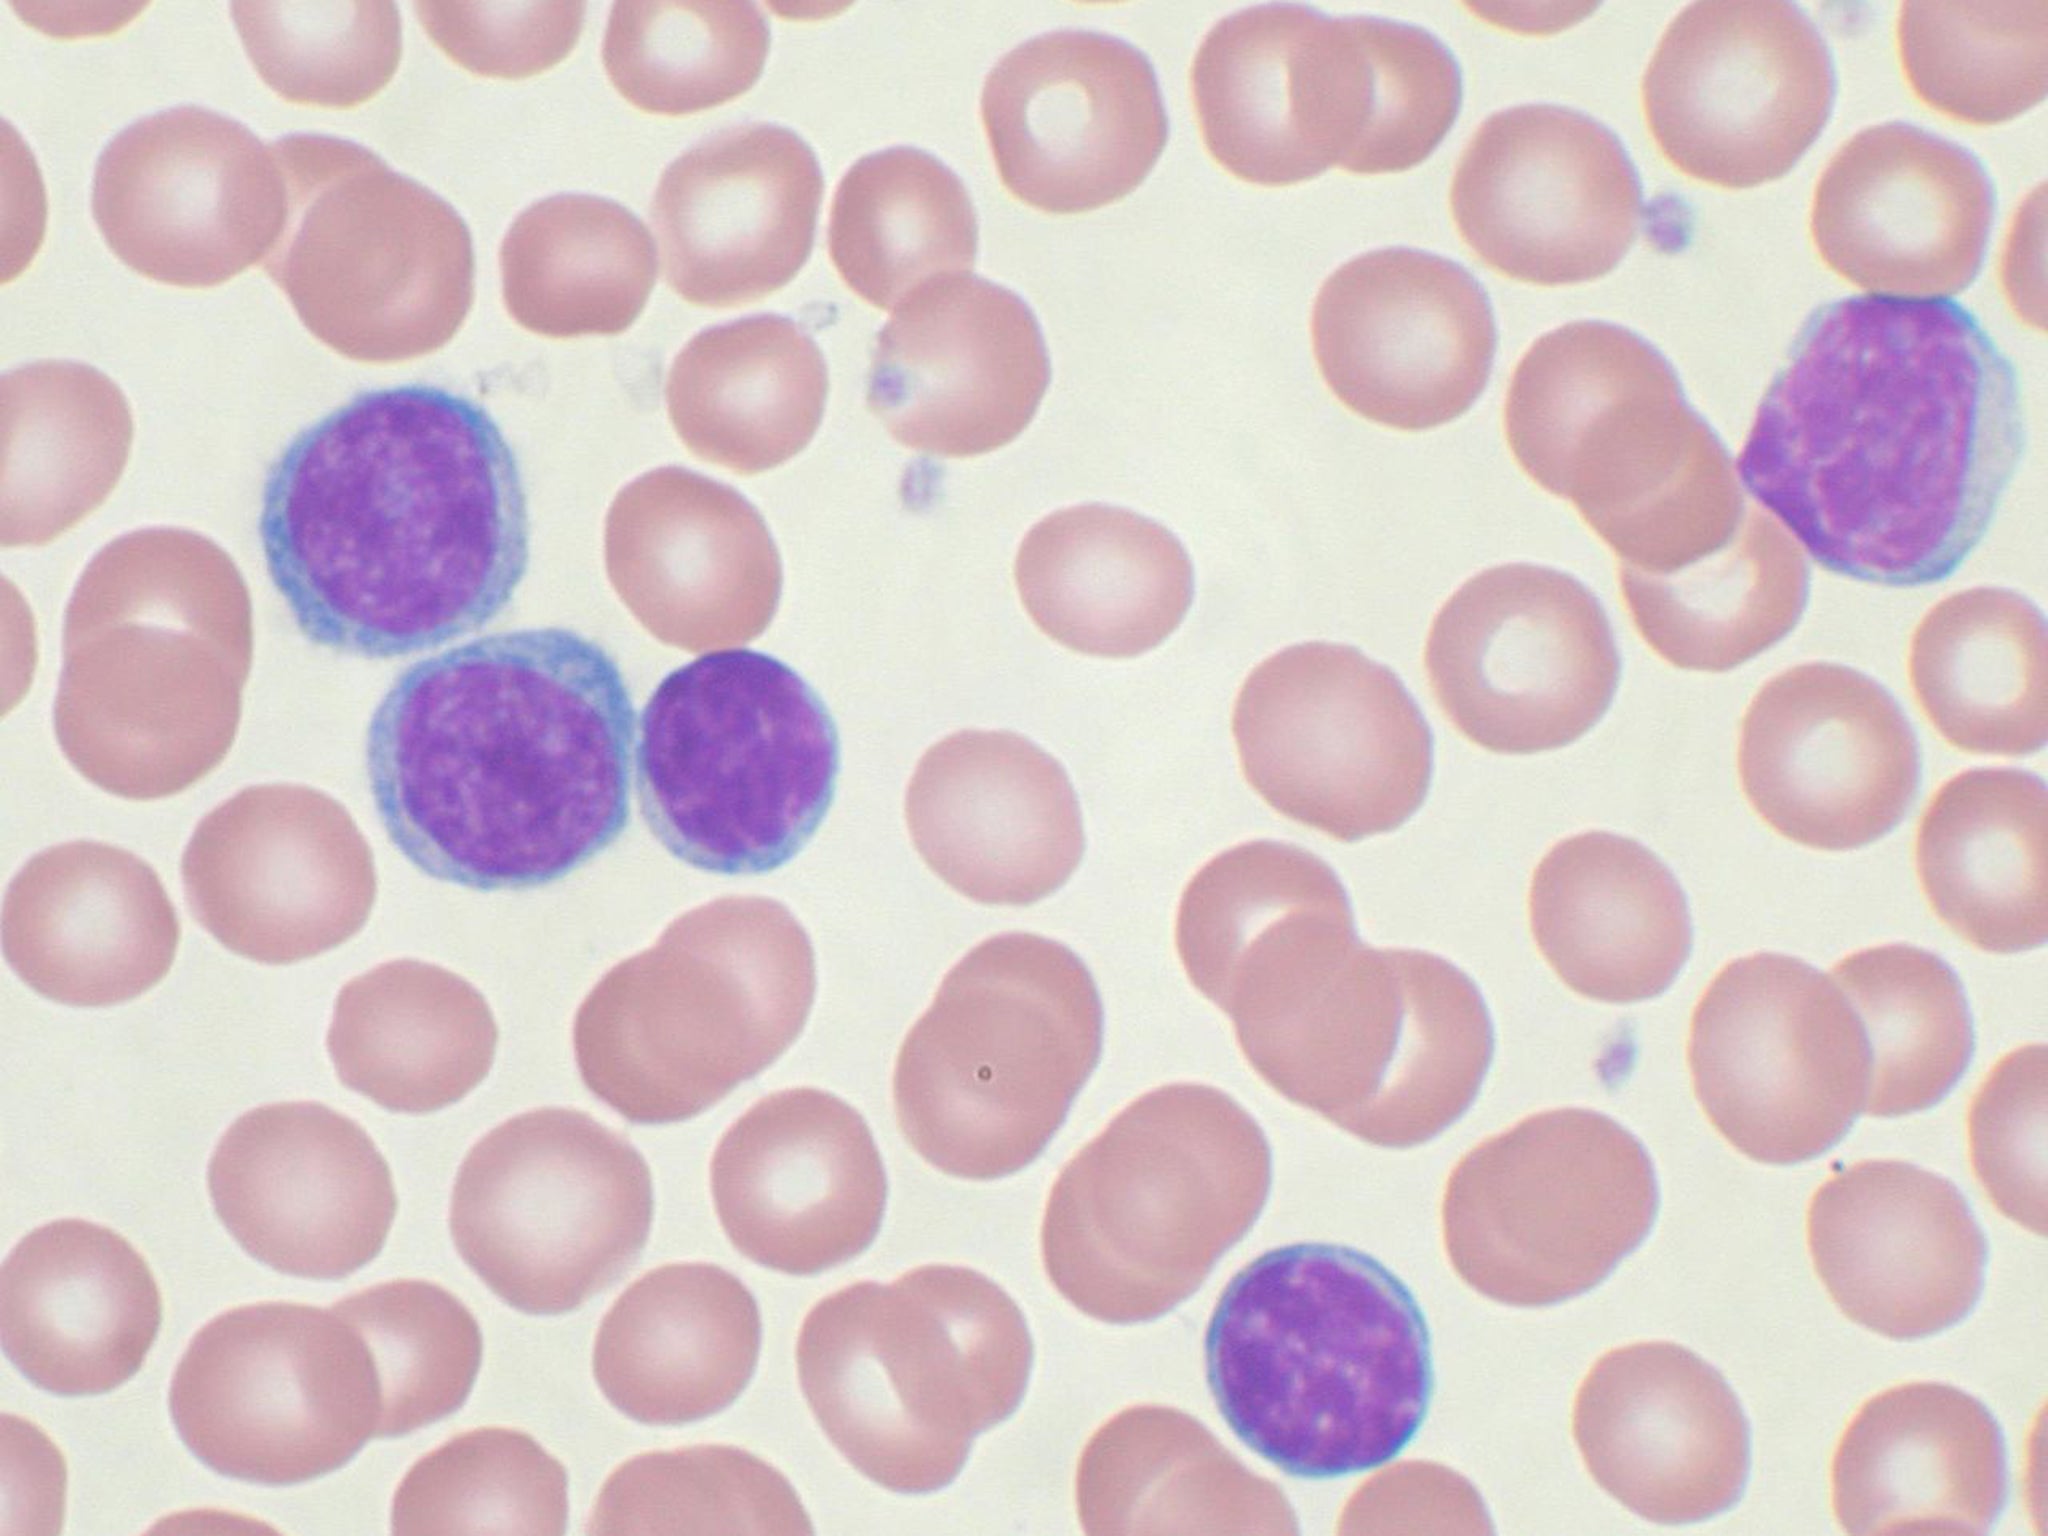 Over 20 per cent of people between 50 and 60 have blood cells marked with the same DNA mutations found in leukaemia cells